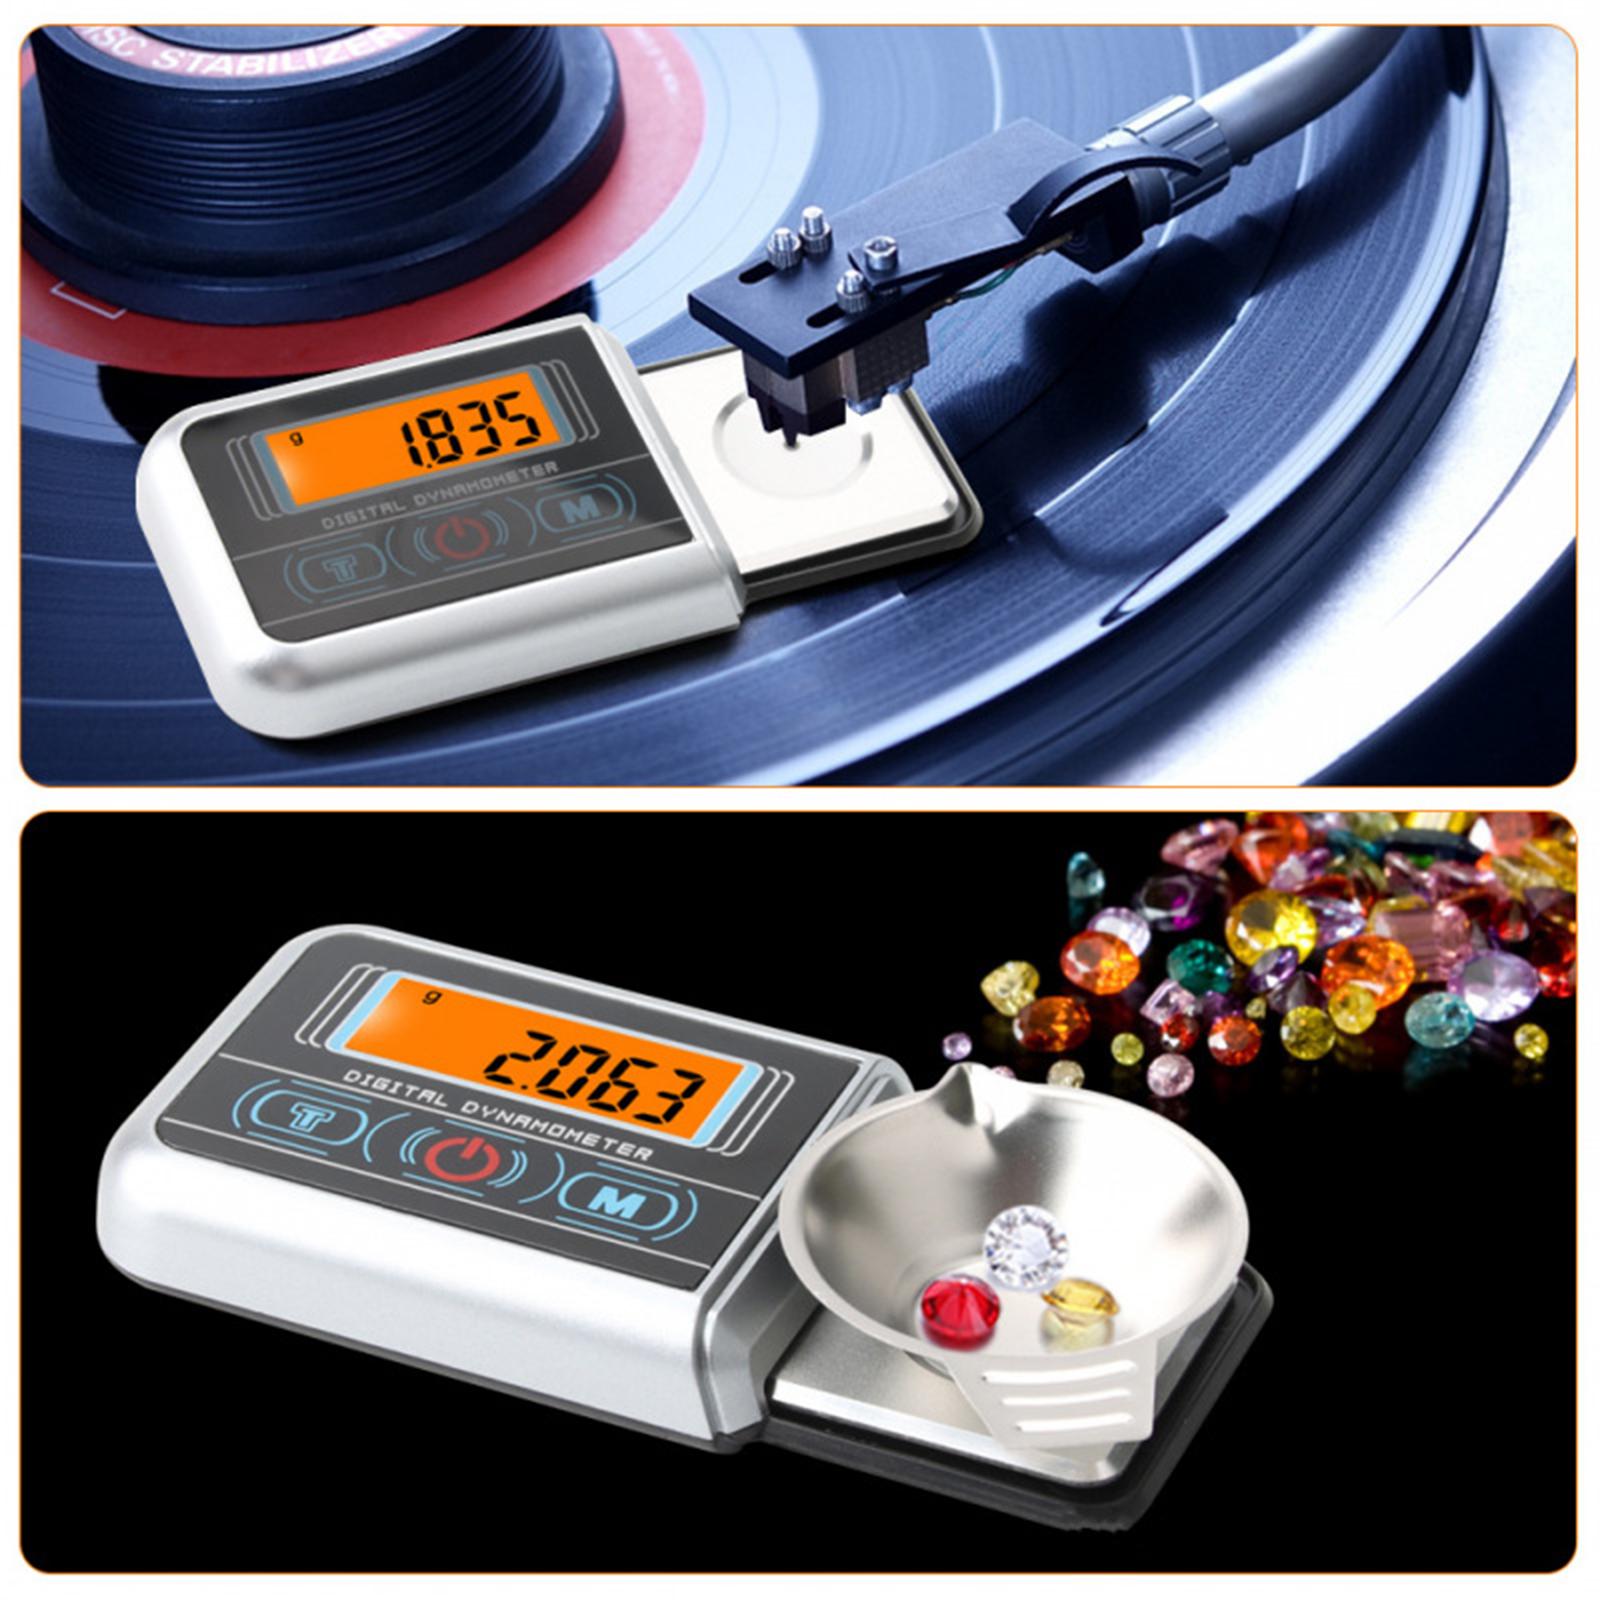 High Precise Digital Mini Turntable Scale Jewellery Scale Weighing Lab Scale